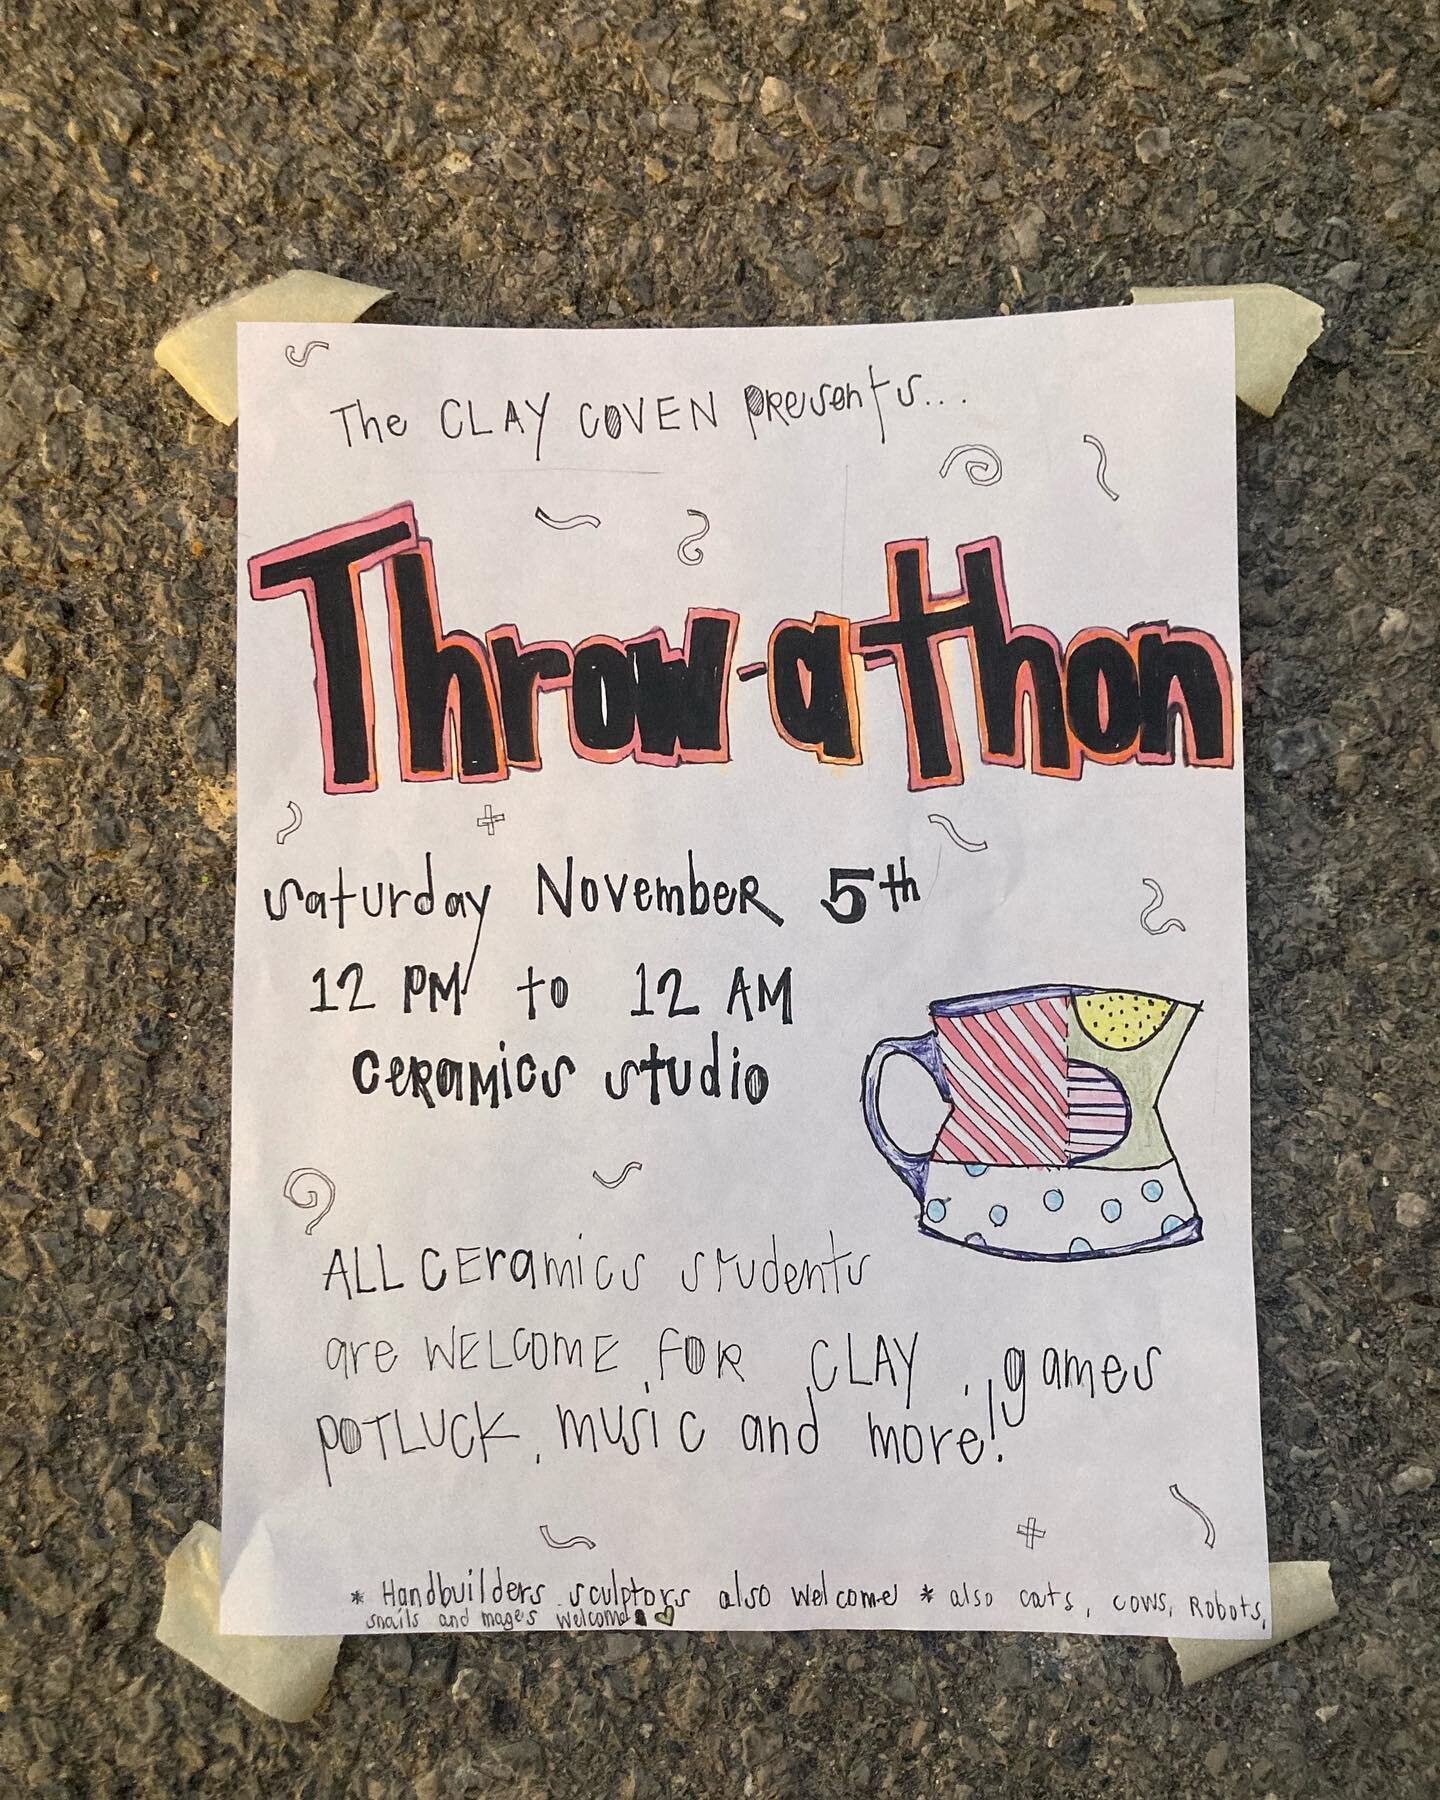 ✨ Throw-a-thon ✨

THIS SATURDAY NOON TO MIDNIGHT
Calling all ceramic students! Need some studio time to finish class work? Want lots of friends to work on the studio with you? 

Join @clayc0ven this Saturday starting at noon for a whole 12 hours of m